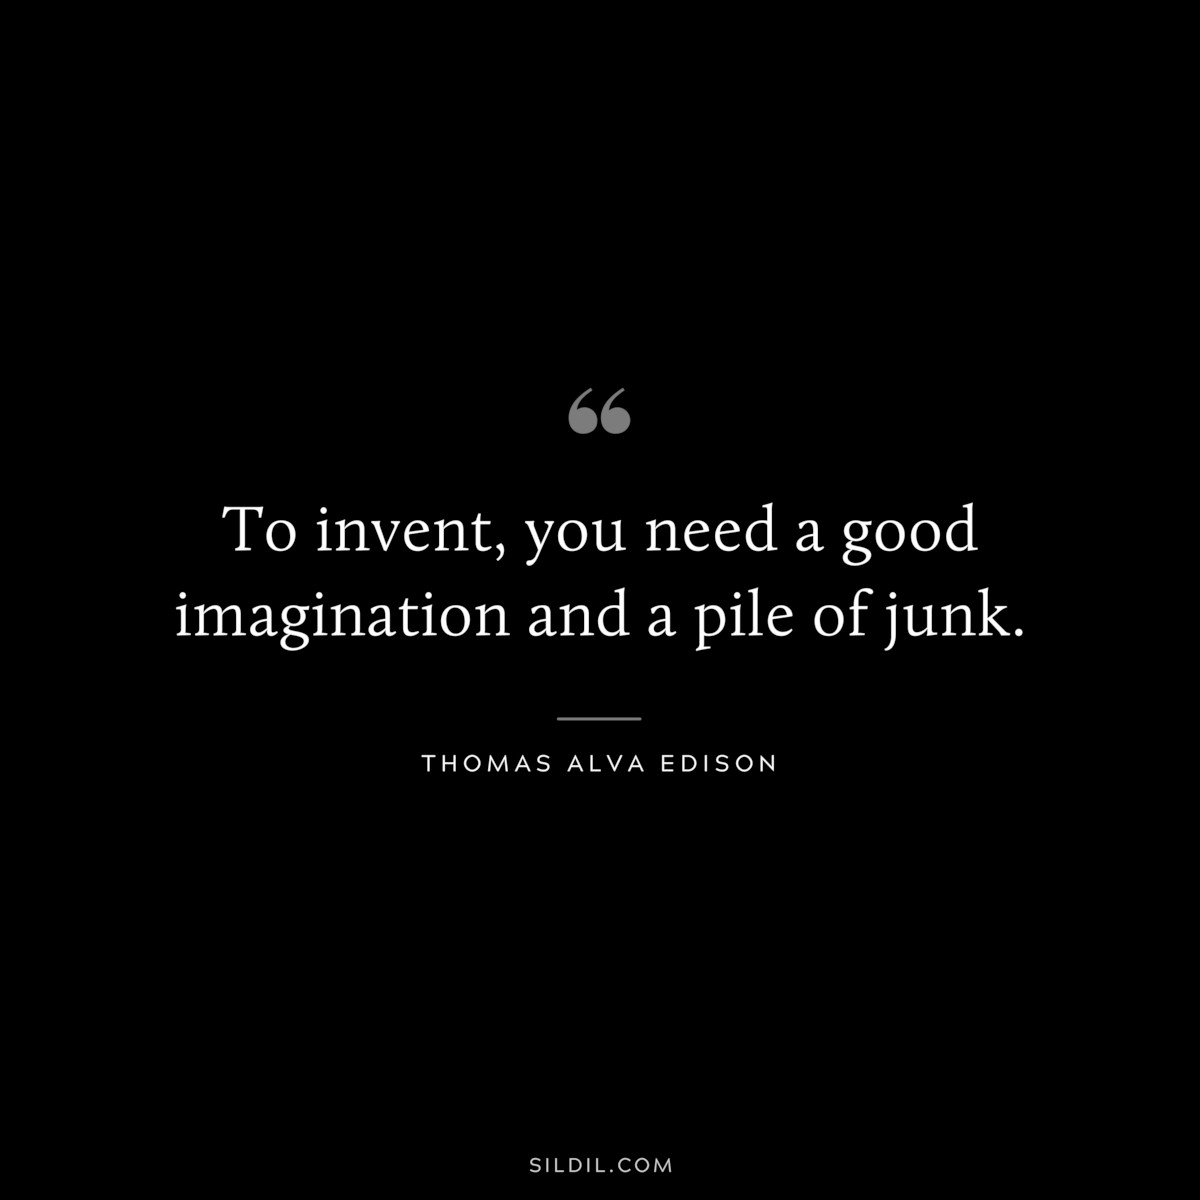 To invent, you need a good imagination and a pile of junk. ― Thomas Alva Edison